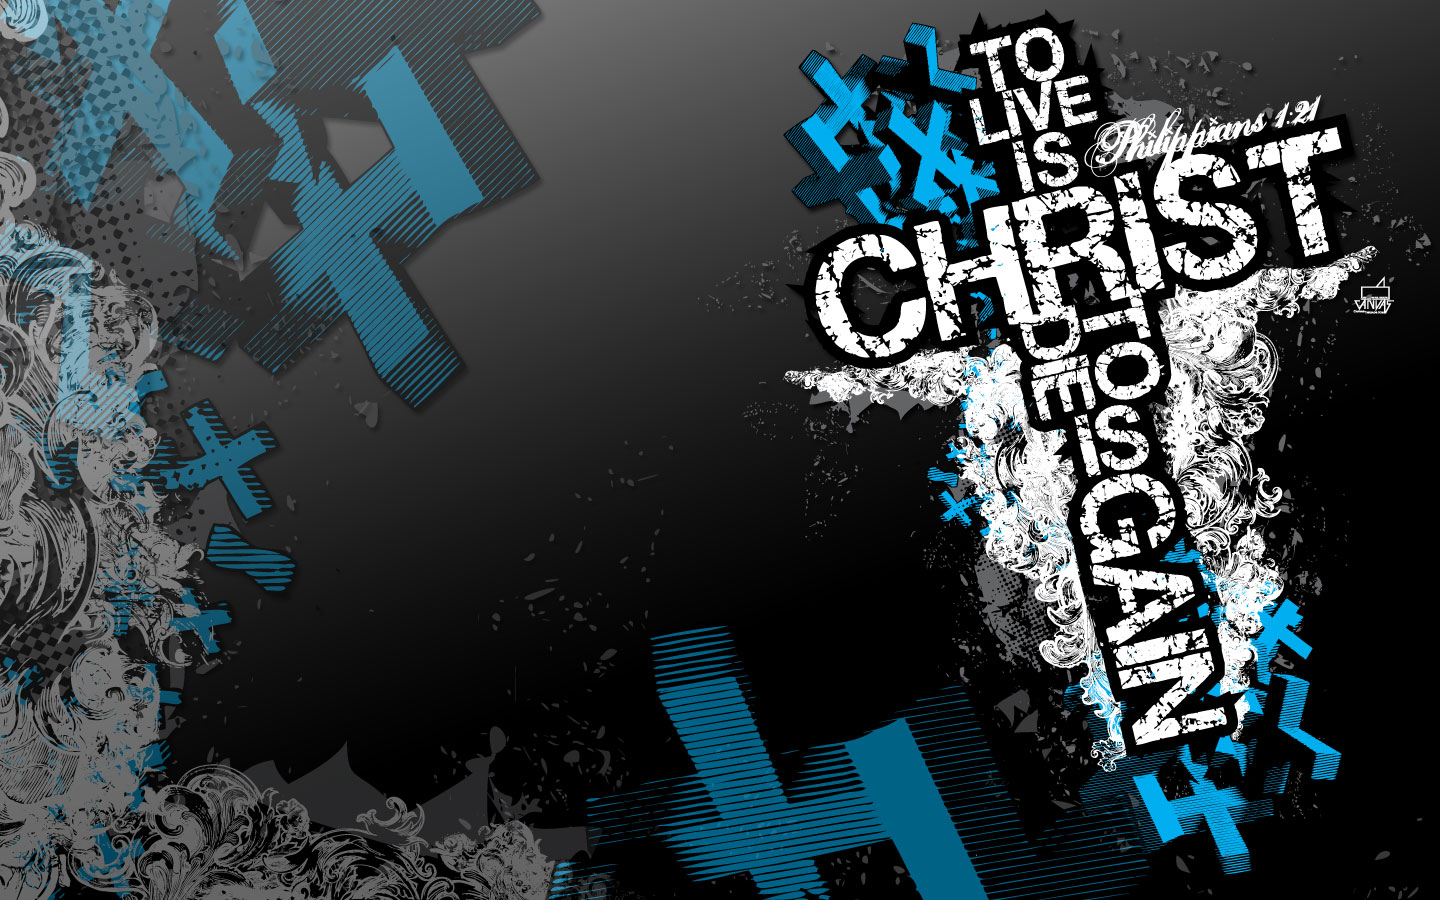 Cool Christian Wallpapers for Free Download, 41 Christian HDQ